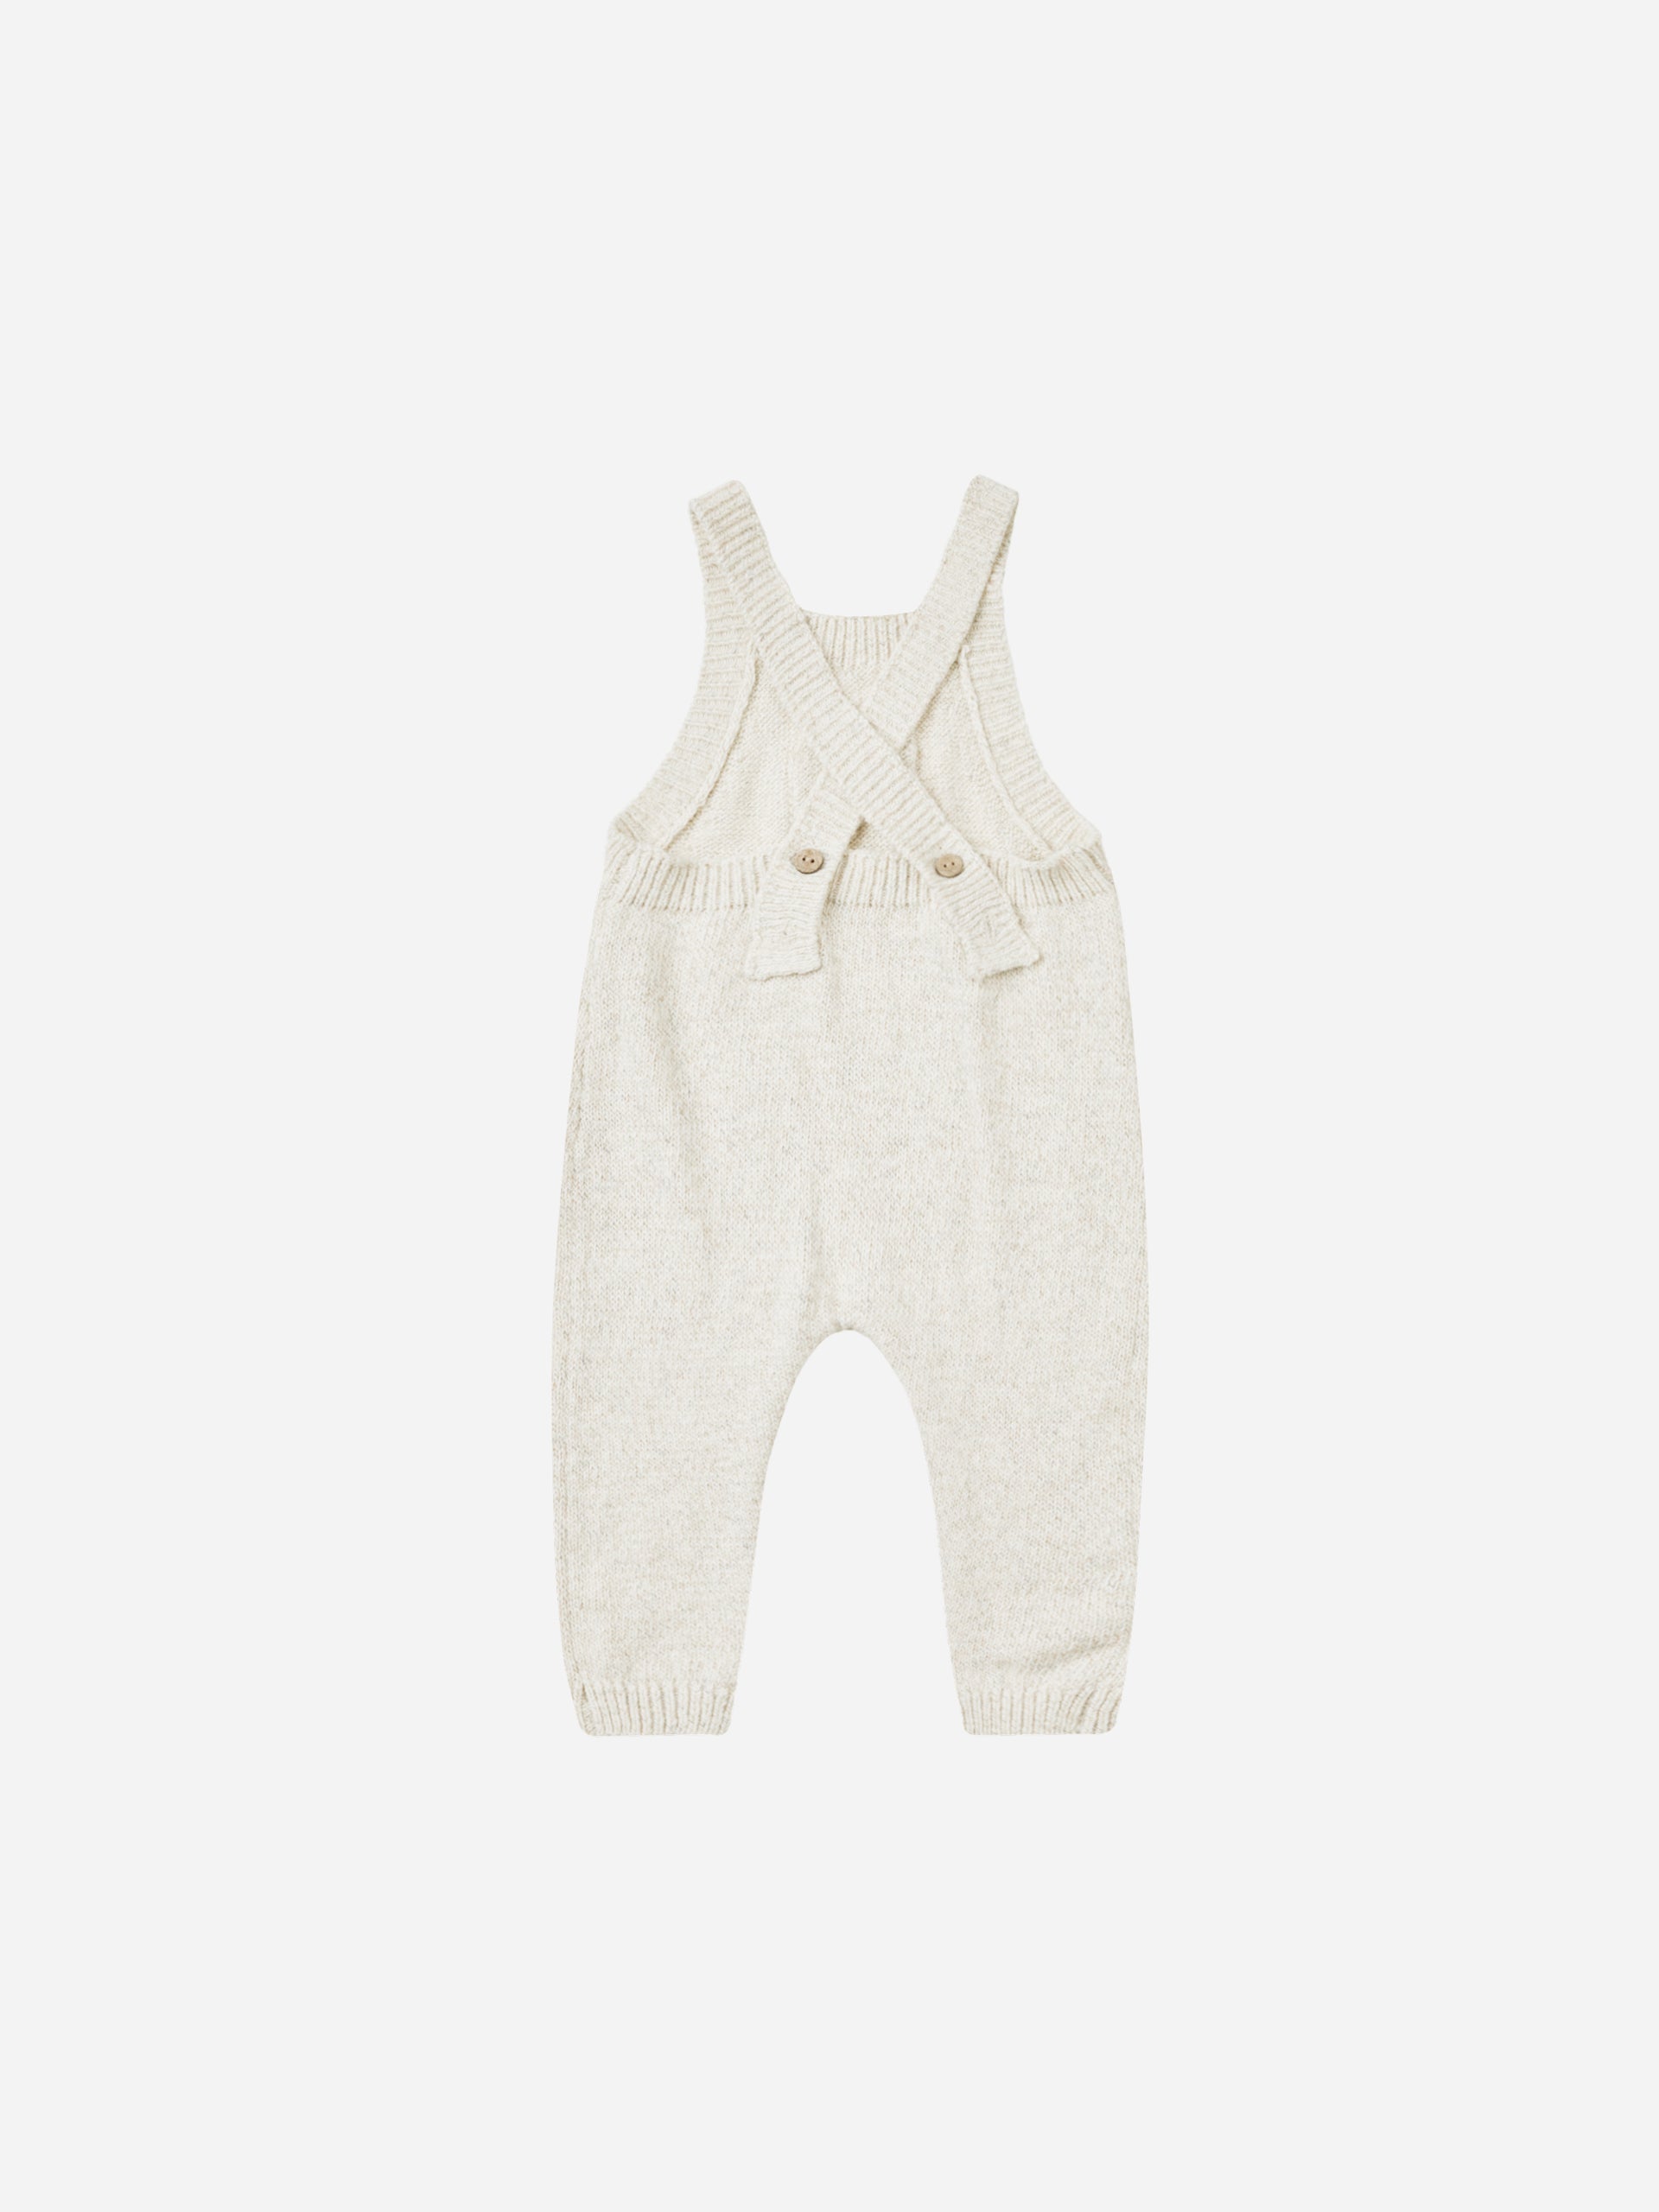 Knit Overalls || Ivory - Rylee + Cru | Kids Clothes | Trendy Baby Clothes | Modern Infant Outfits |